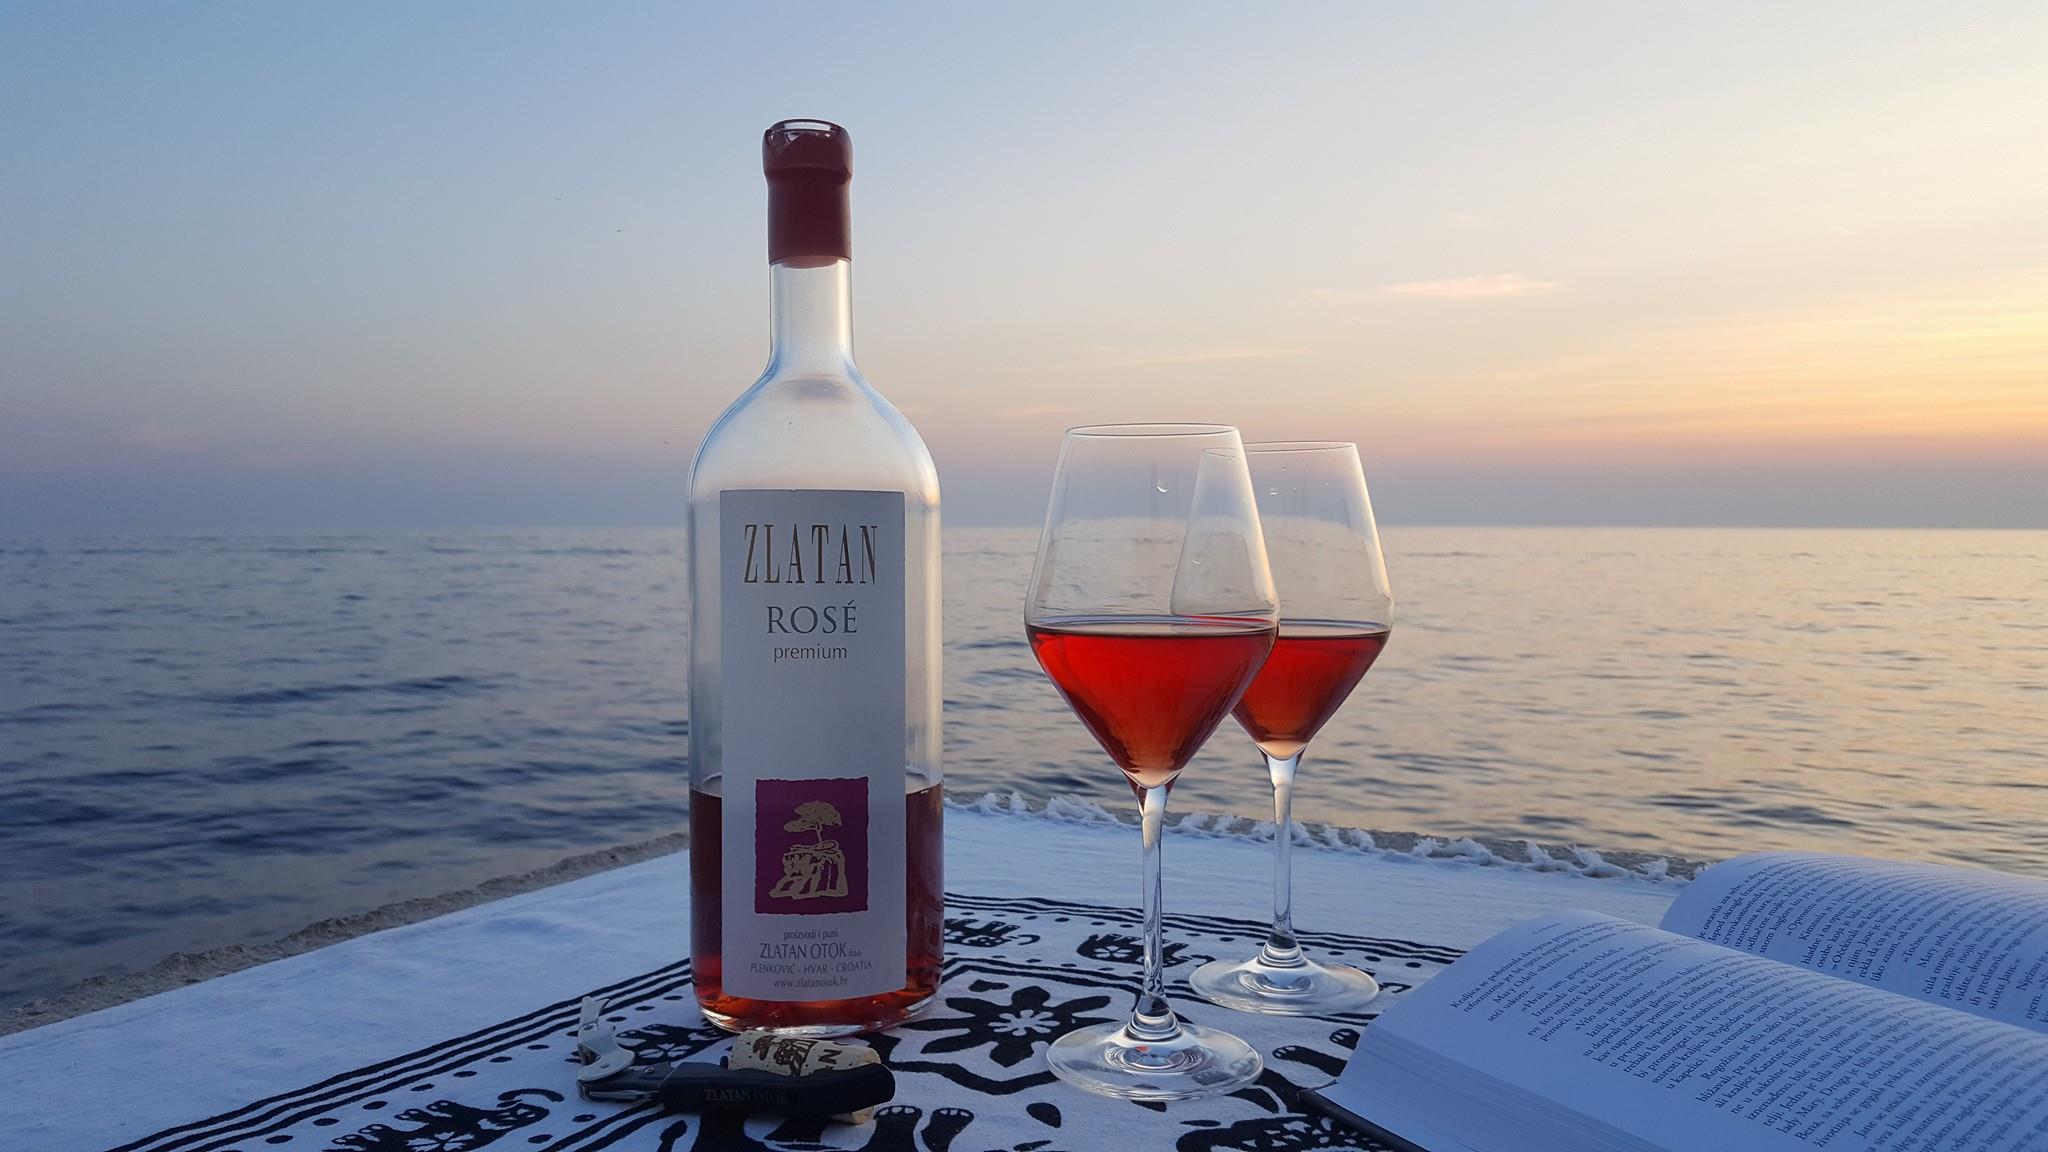 This image shows a half-empty bottle of rose Zlatan Otok wine, two glasses filled with rose wine and an open book with the sea and the sunset in the background. 